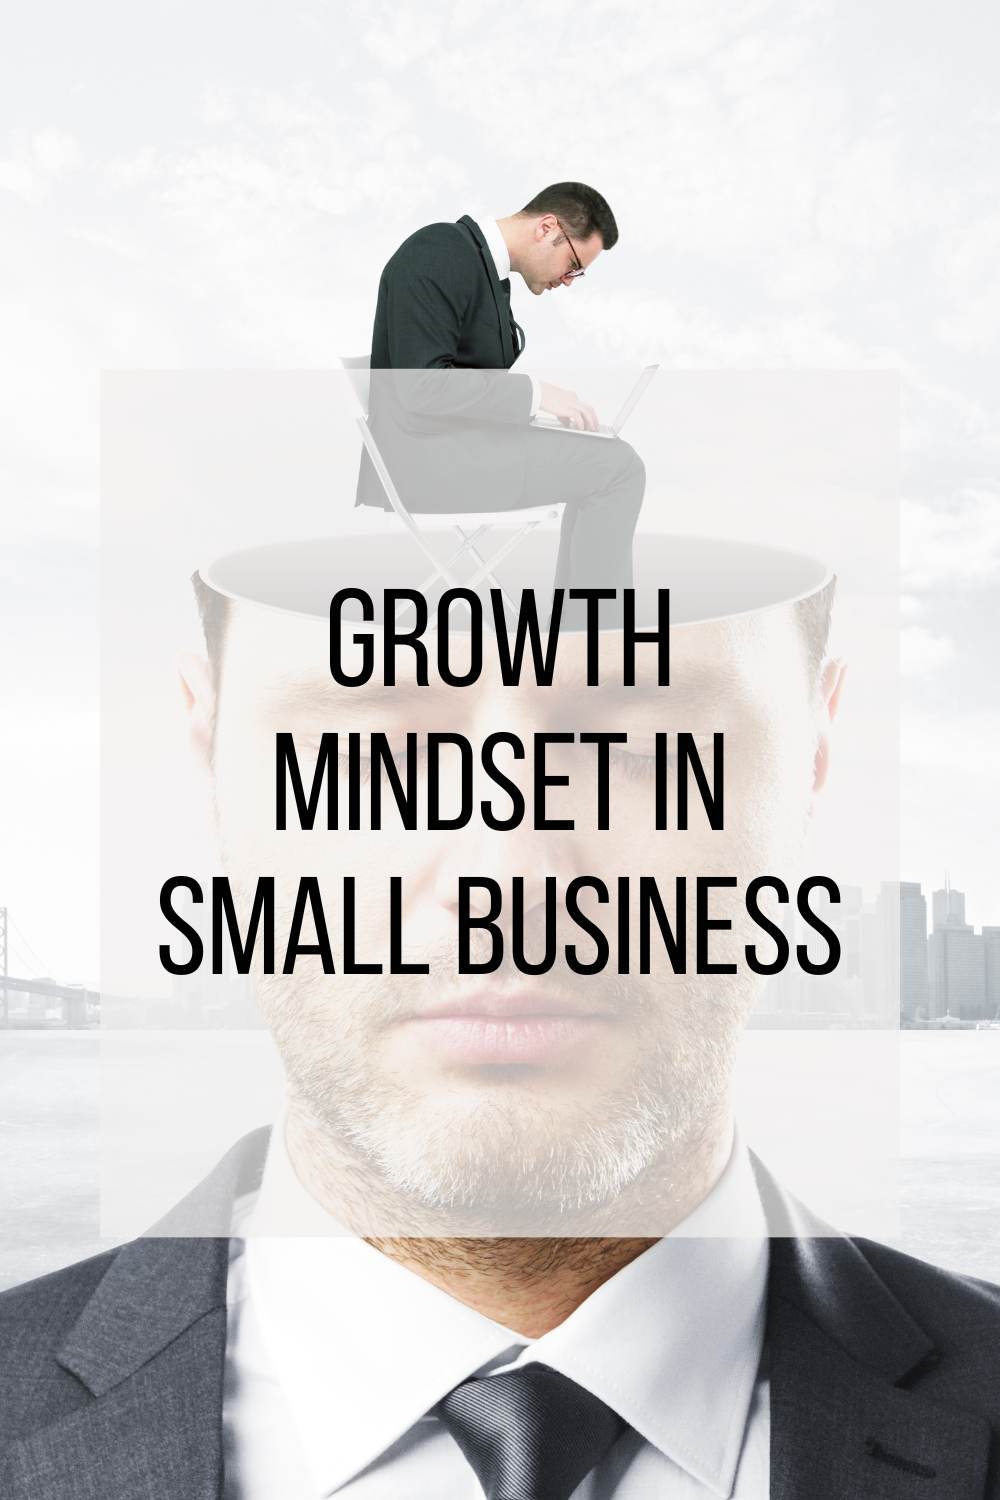 Growth Mindset in Small Business